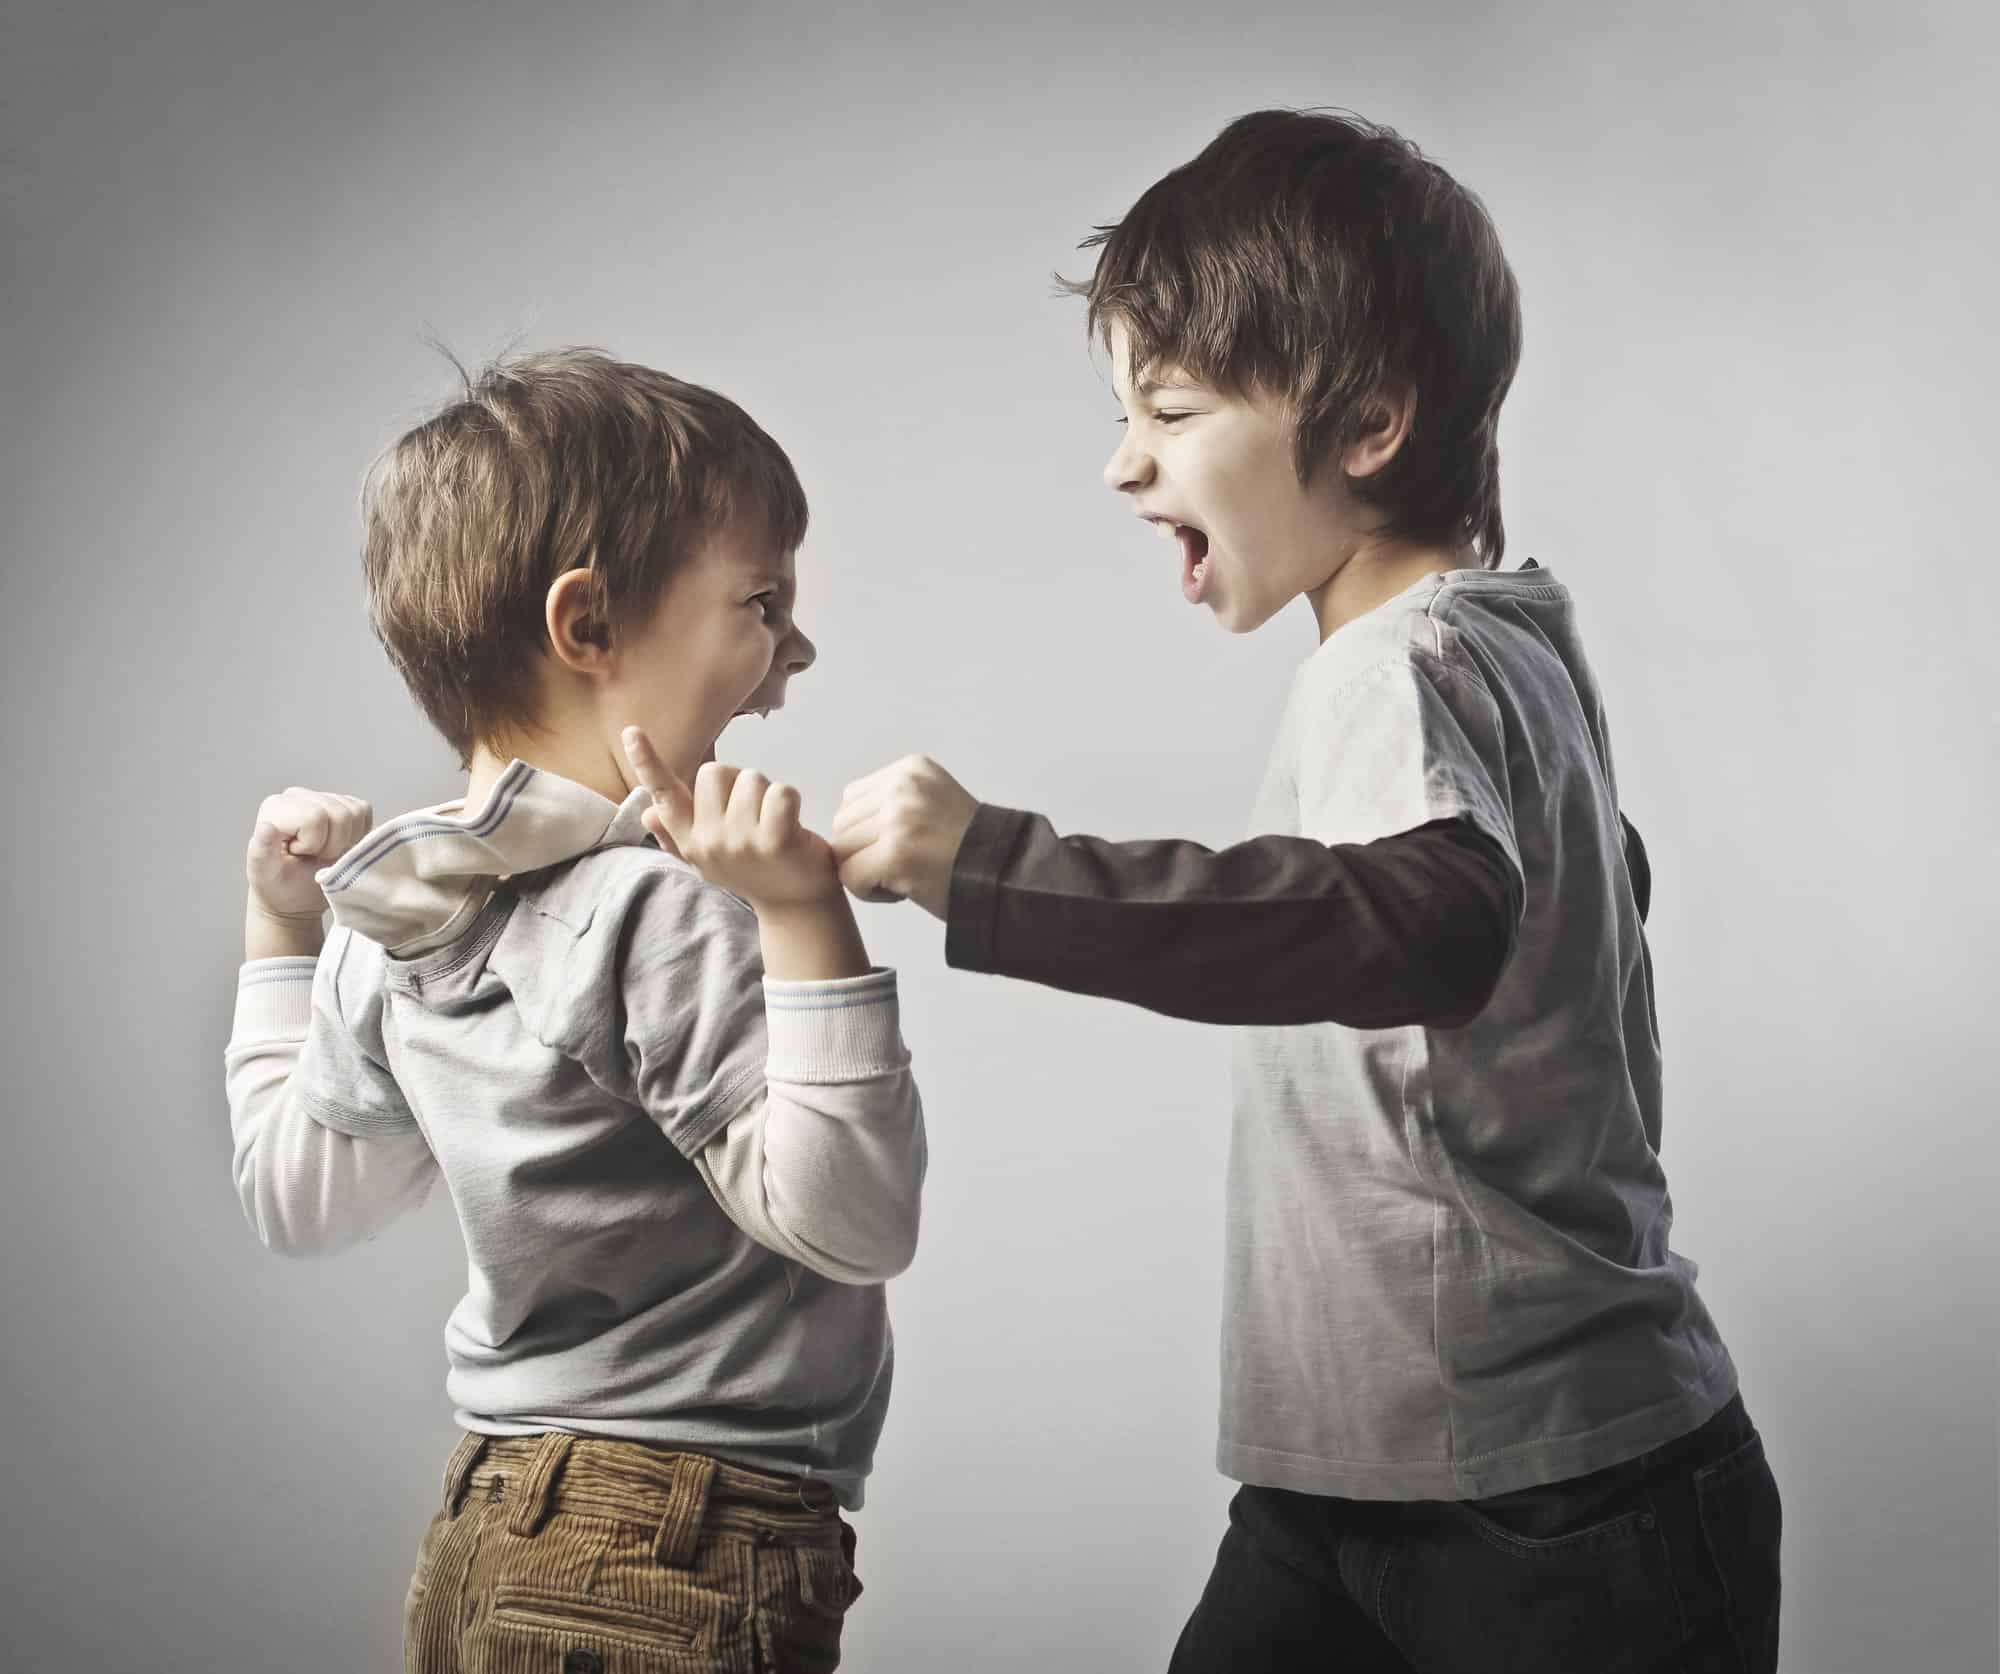 Kids fight. While that's normal, it can be exhausting for their parents. Discover 4 simple strategies to end sibling rivalry for good. For more parenting tips and family-life inspiration, follow Made In A Pinch on Pinterest!